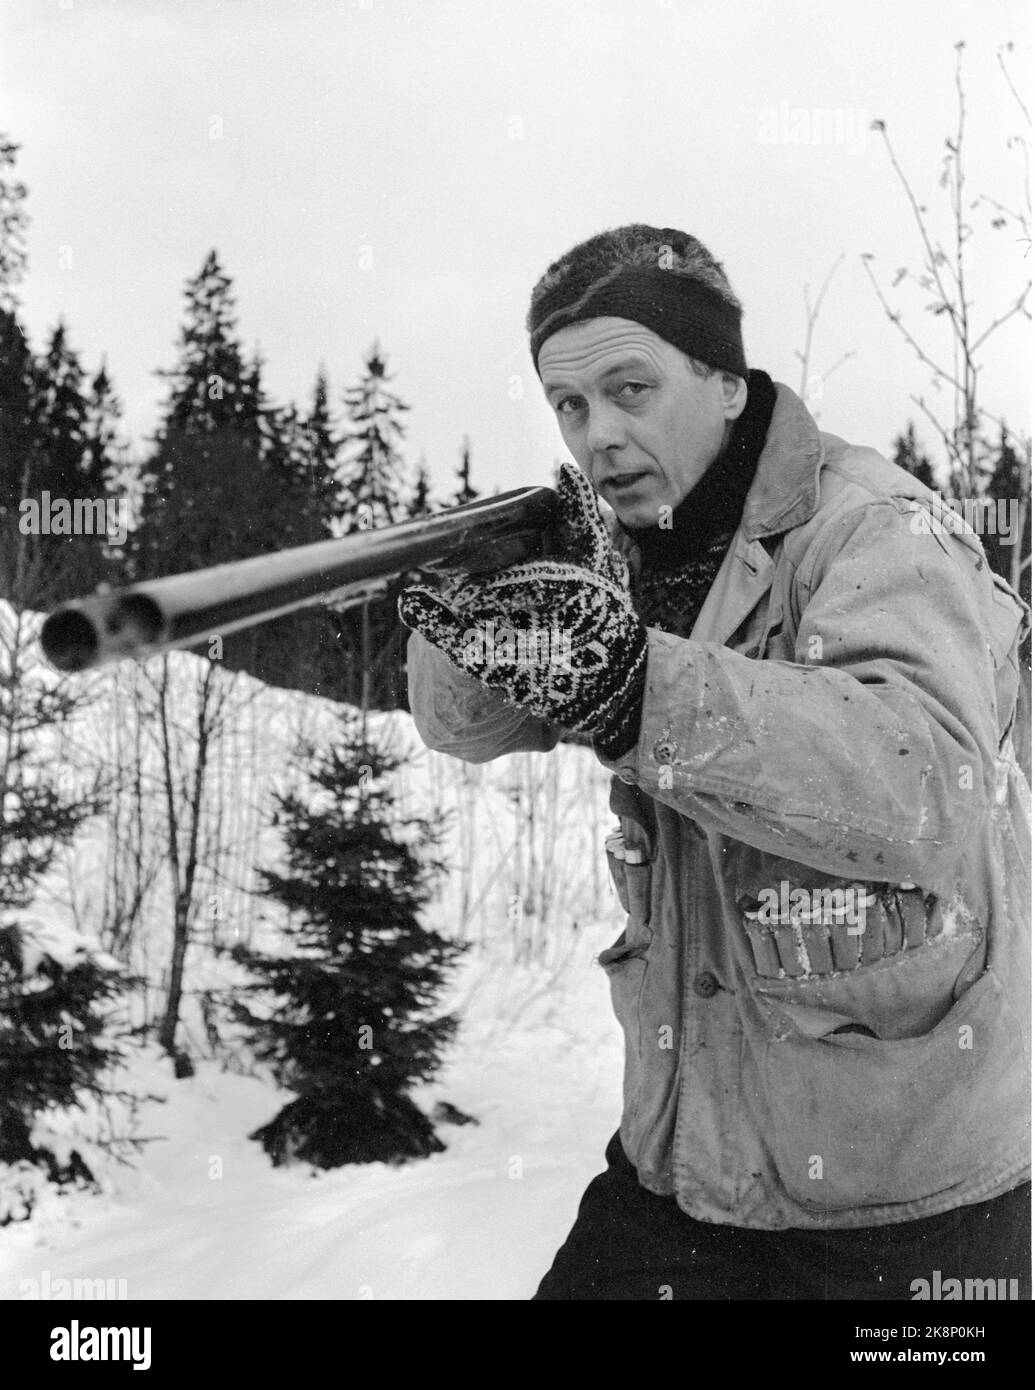 November 1968. Actor Toralv Maurstad is an avid outdoor man and hunter. Here we see him out hunting with rifles. Photo Ivar Aaserud / Current / NTB Stock Photo